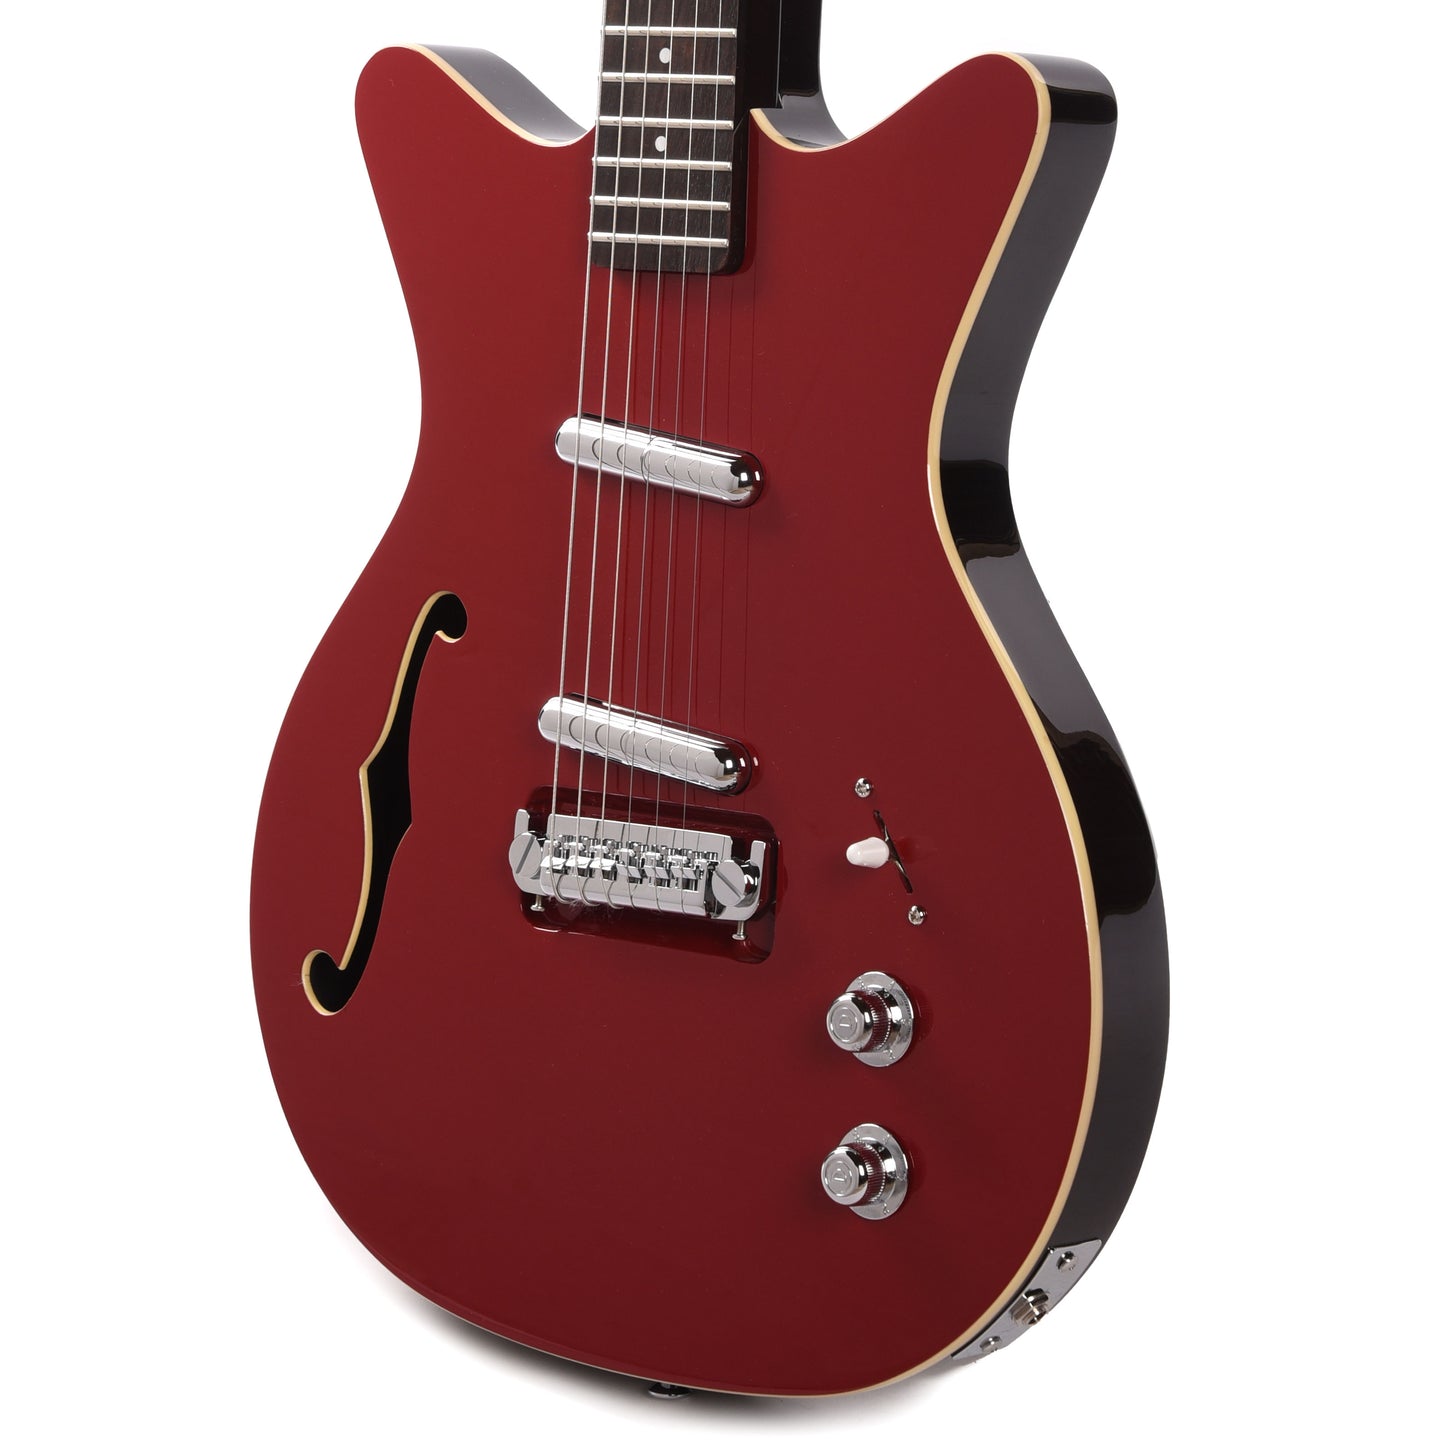 Danelectro Fifty Niner Red Top